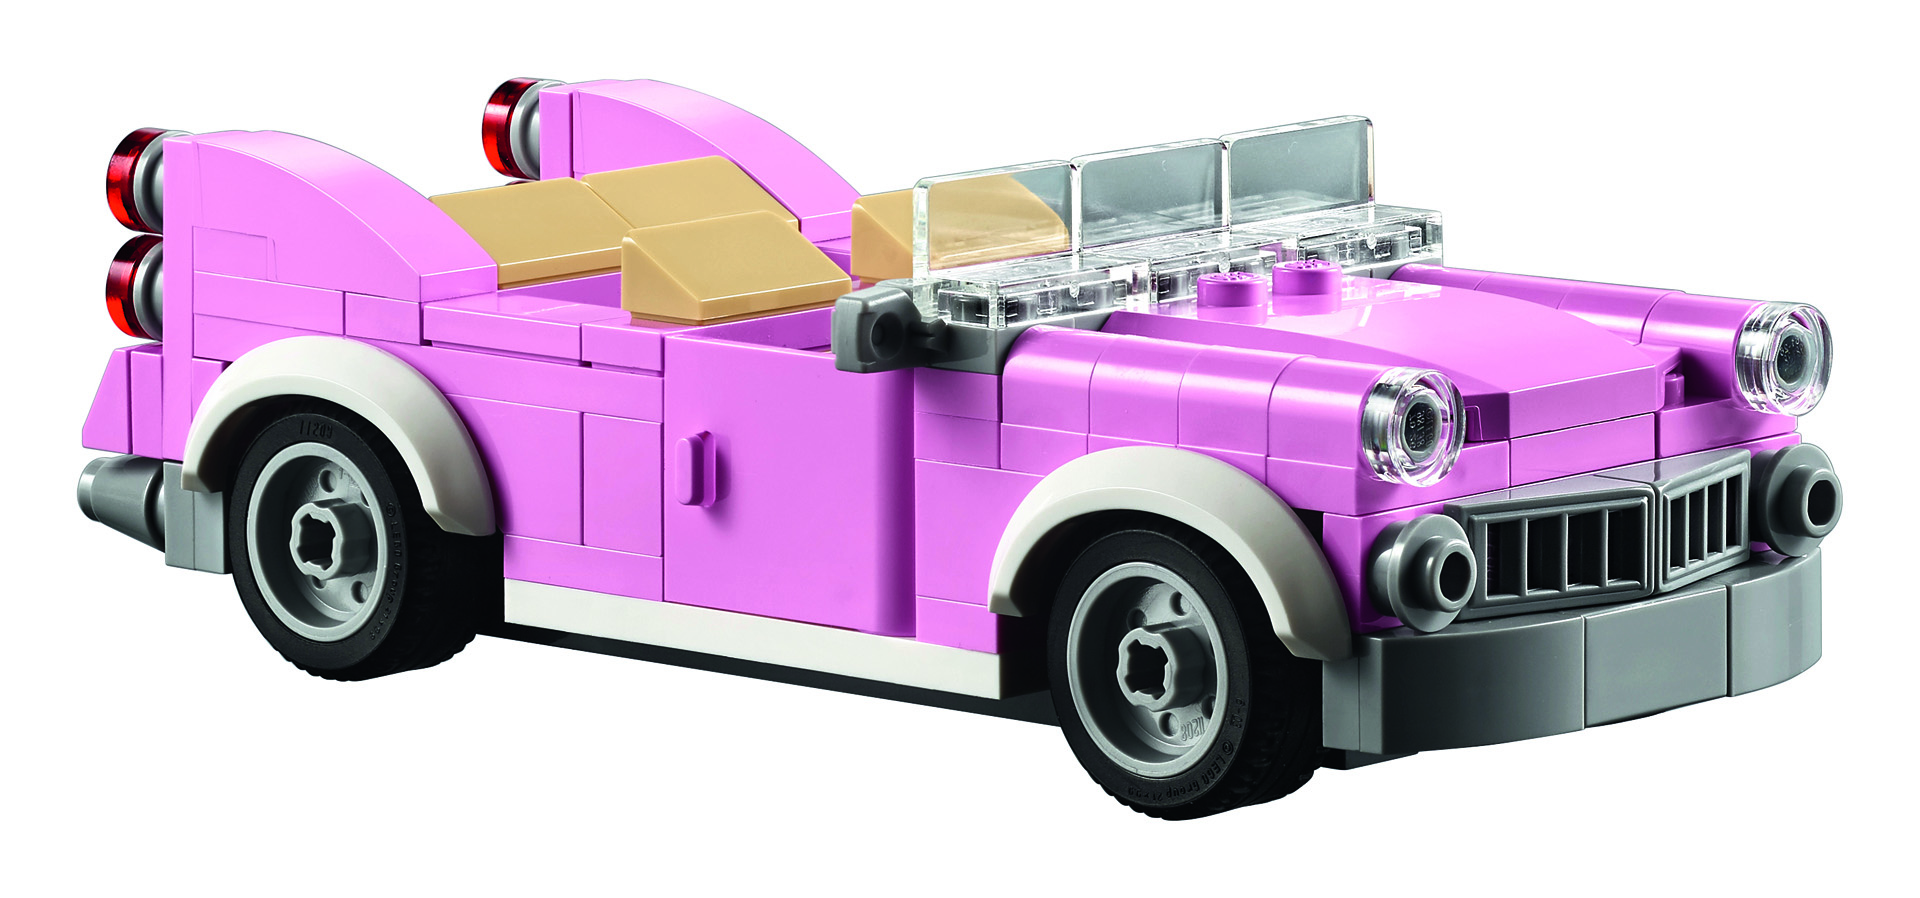 New Downtown Diner Set Brings ’50s Flair To LEGO Cities